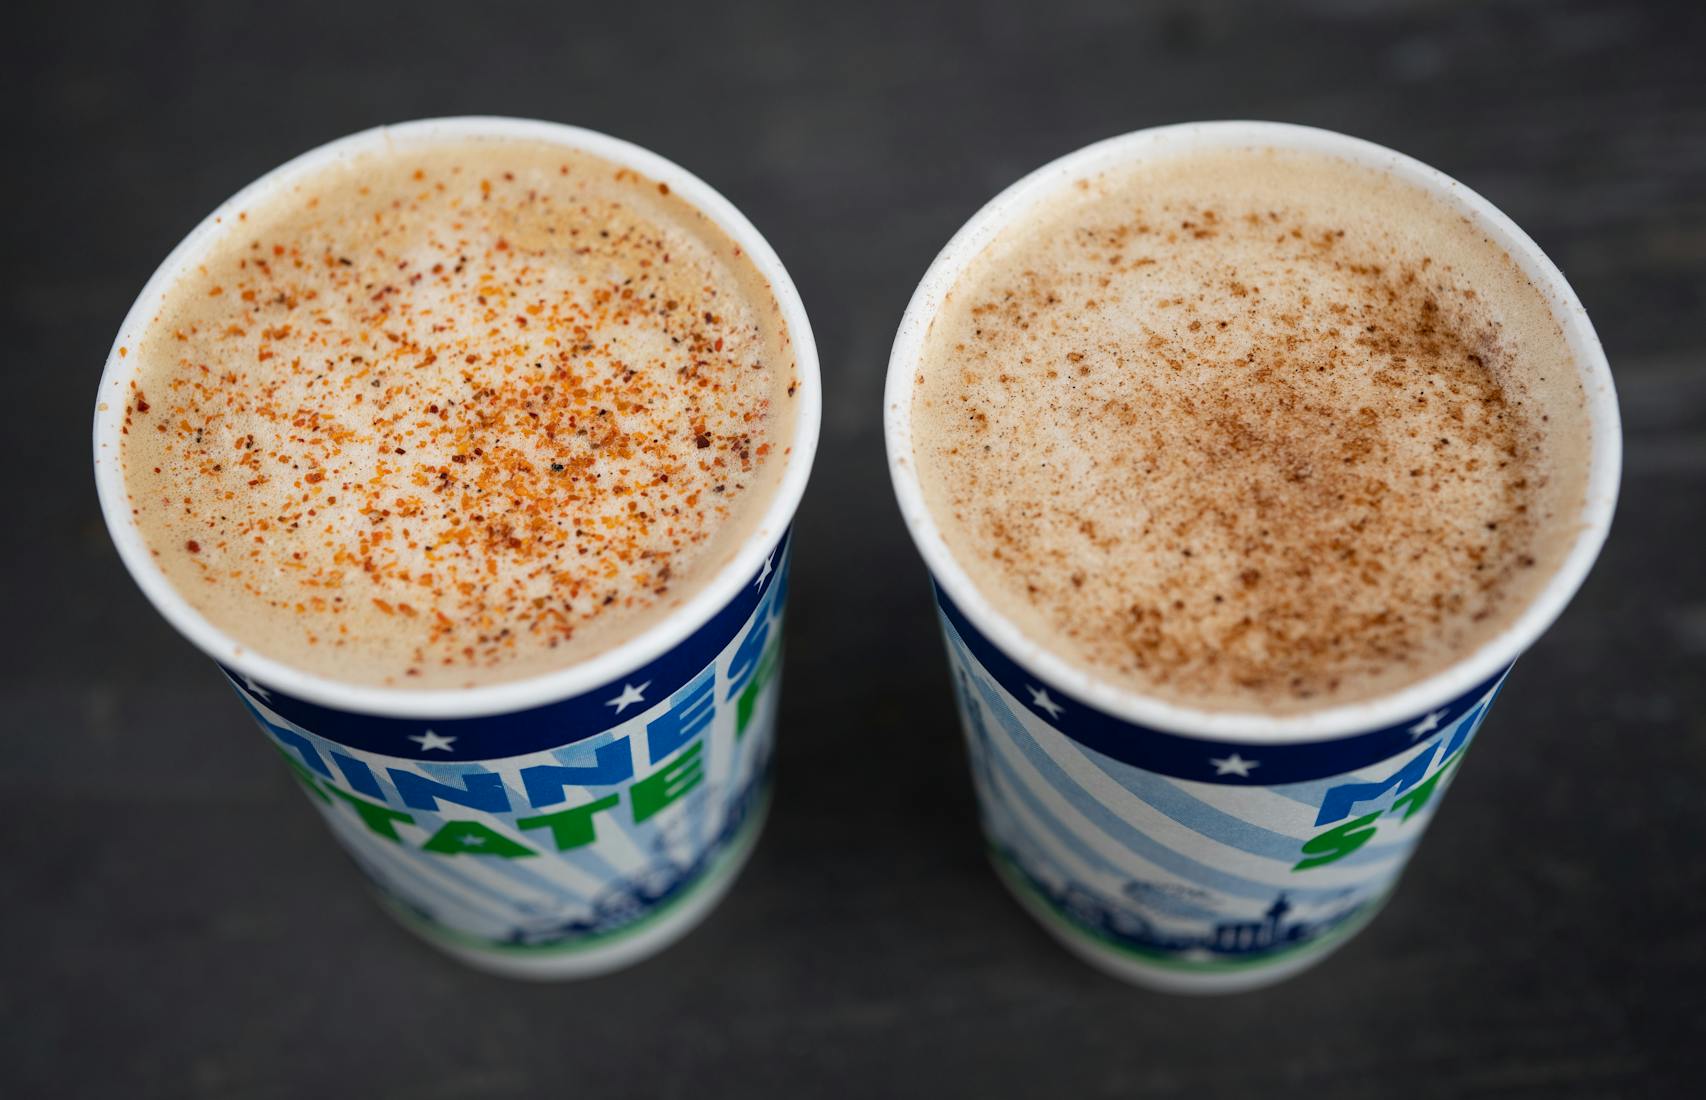 Chili Lime & Agave Latte and Cardamom Turkish Spice Latte from French Meadow New foods at the Minnesota State Fair photographed on Thursday, Aug. 25, 2022 in Falcon Heights, Minn. ] RENEE JONES SCHNEIDER • renee.jones@startribune.com